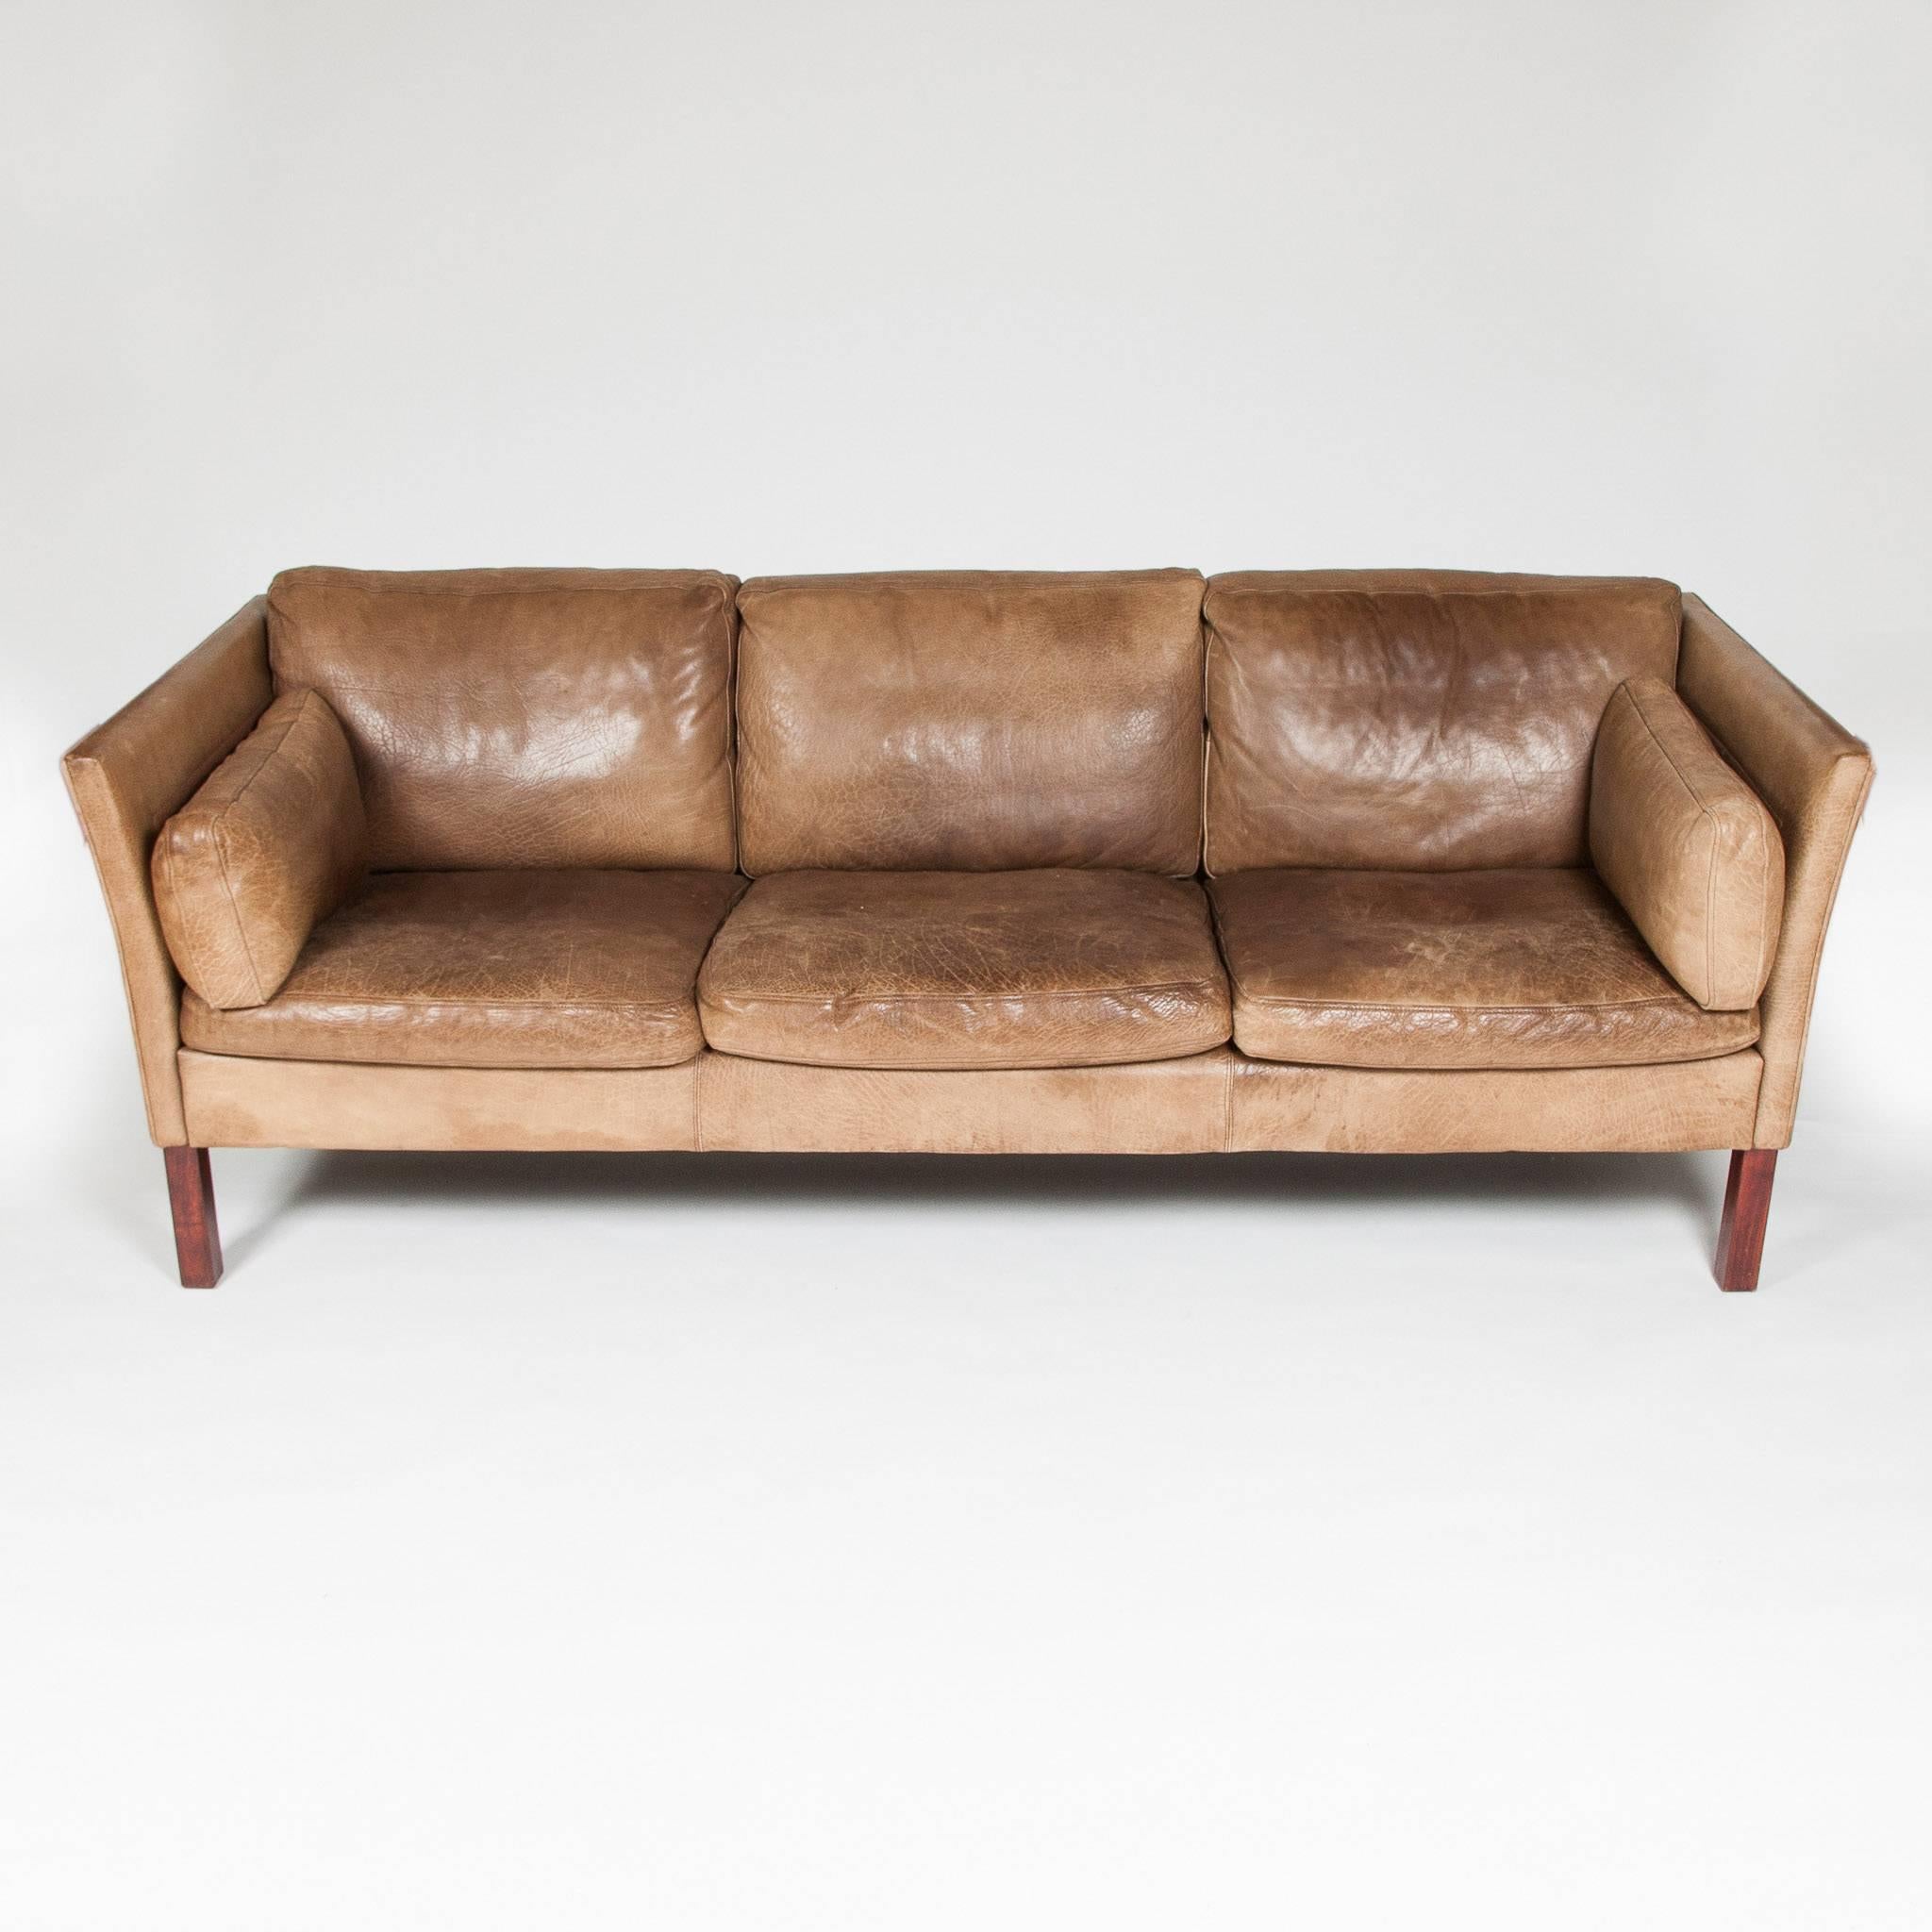 A mid-1970s three seat sofa upholstered in patinated light brown buffalo hide, with stained beech legs.

Designed by Mogens Hansen in 1971 for MH Møbler A/S of Hasselager, Denmark.